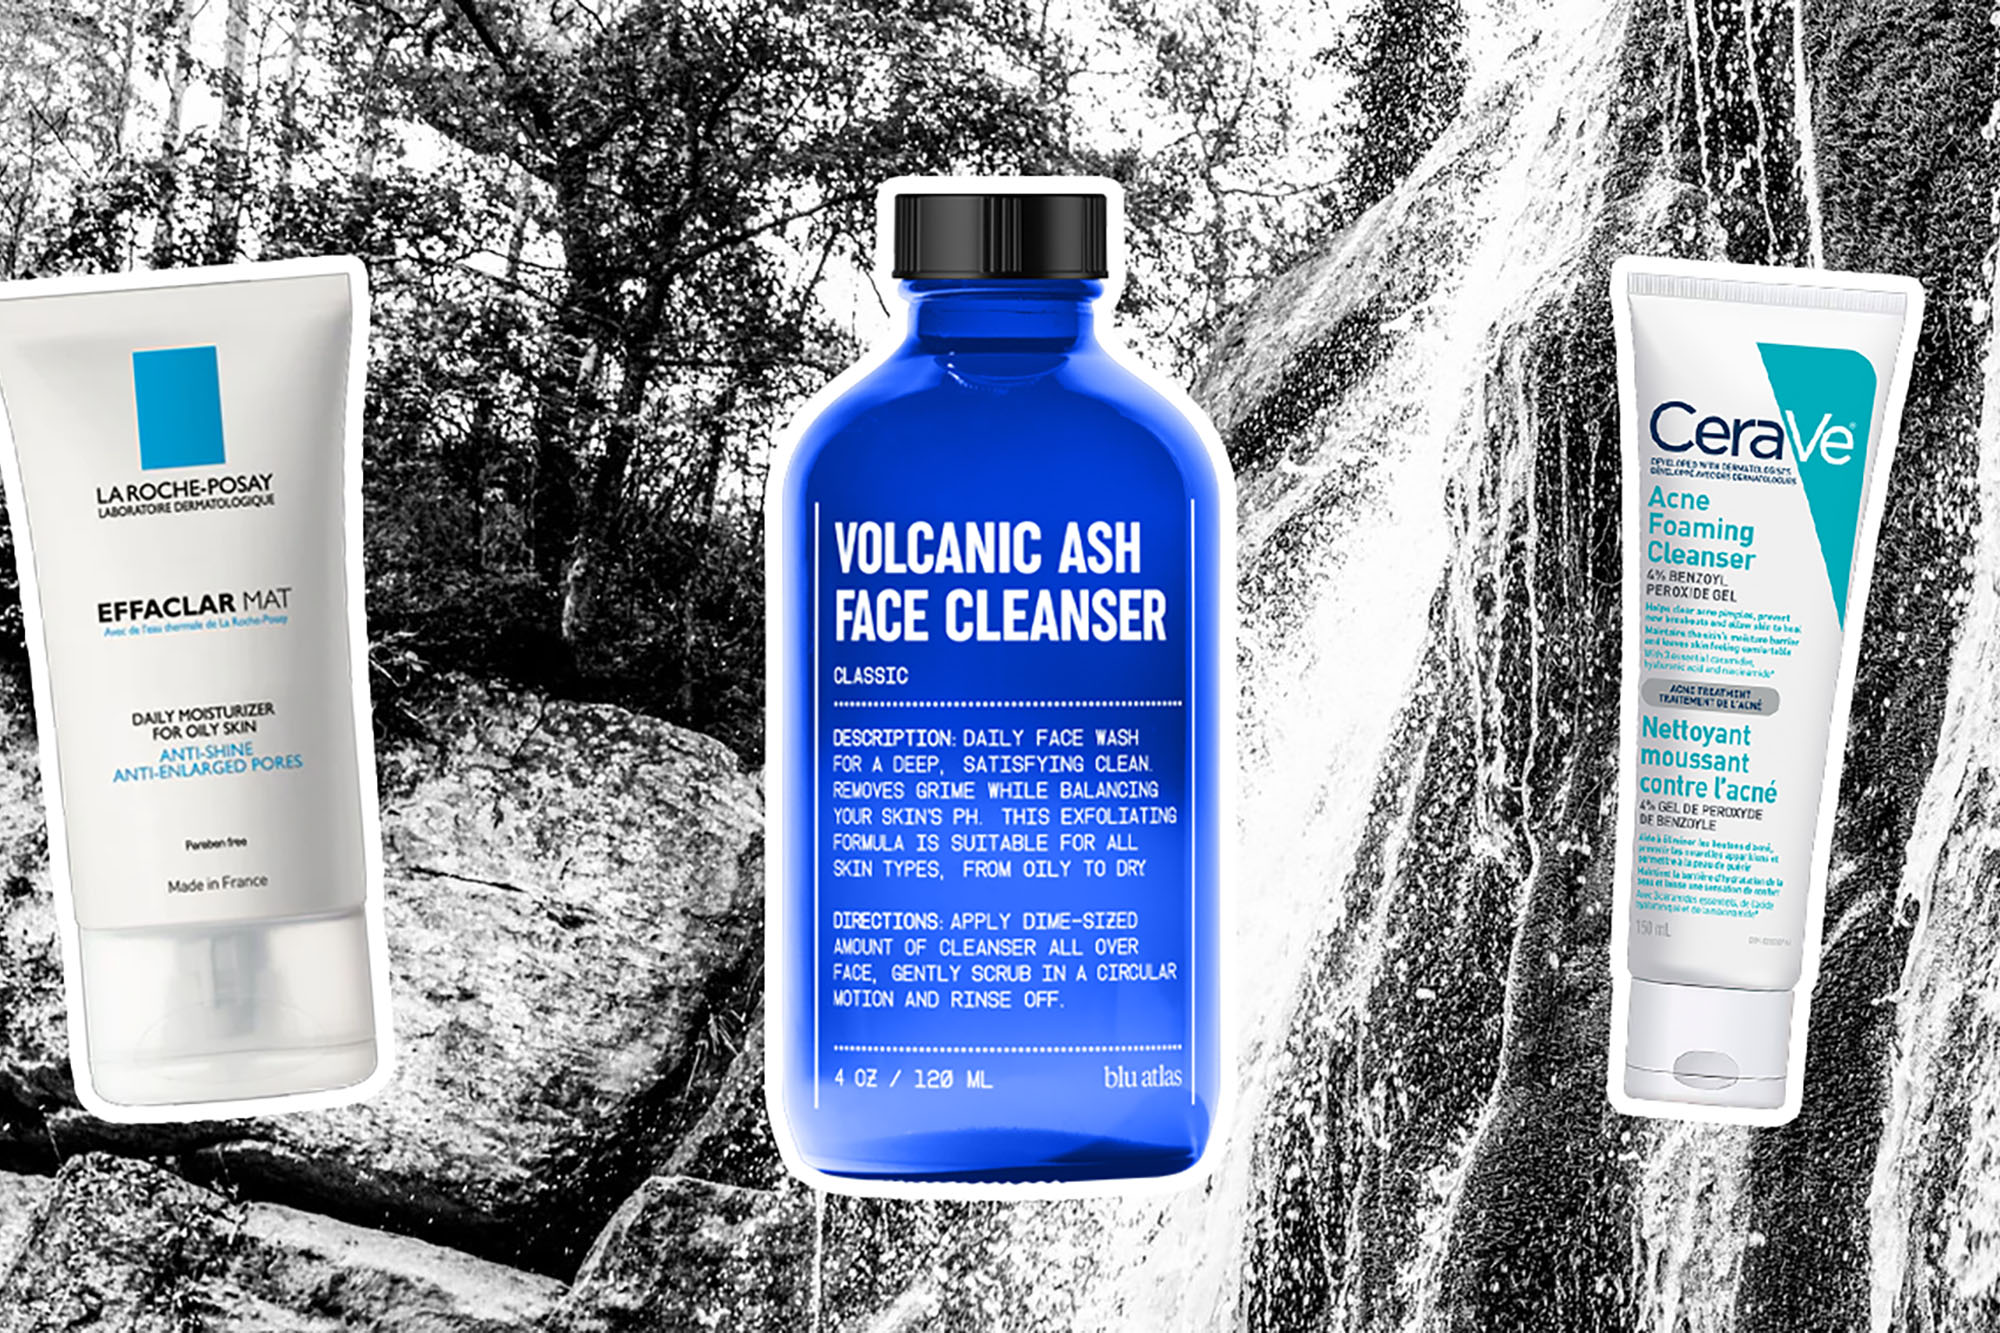 Acne Face Wash for Pore Cleansing